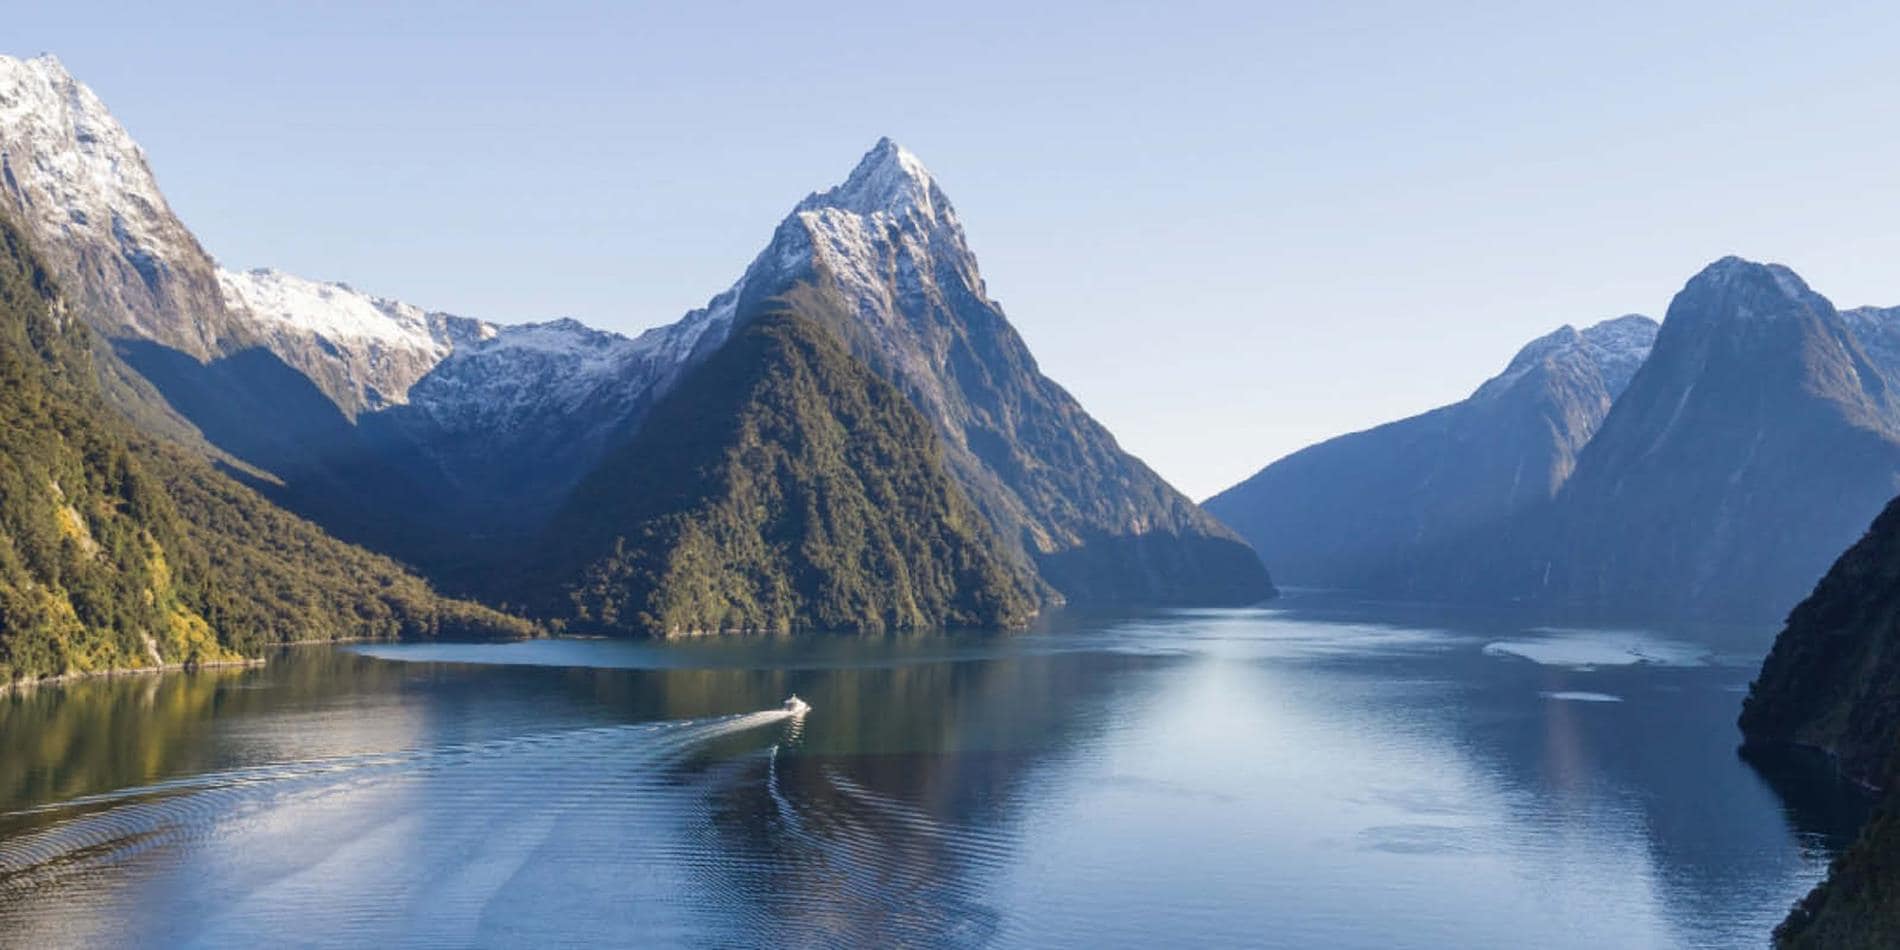 Long distance view of Milford Sound depicting the mountains